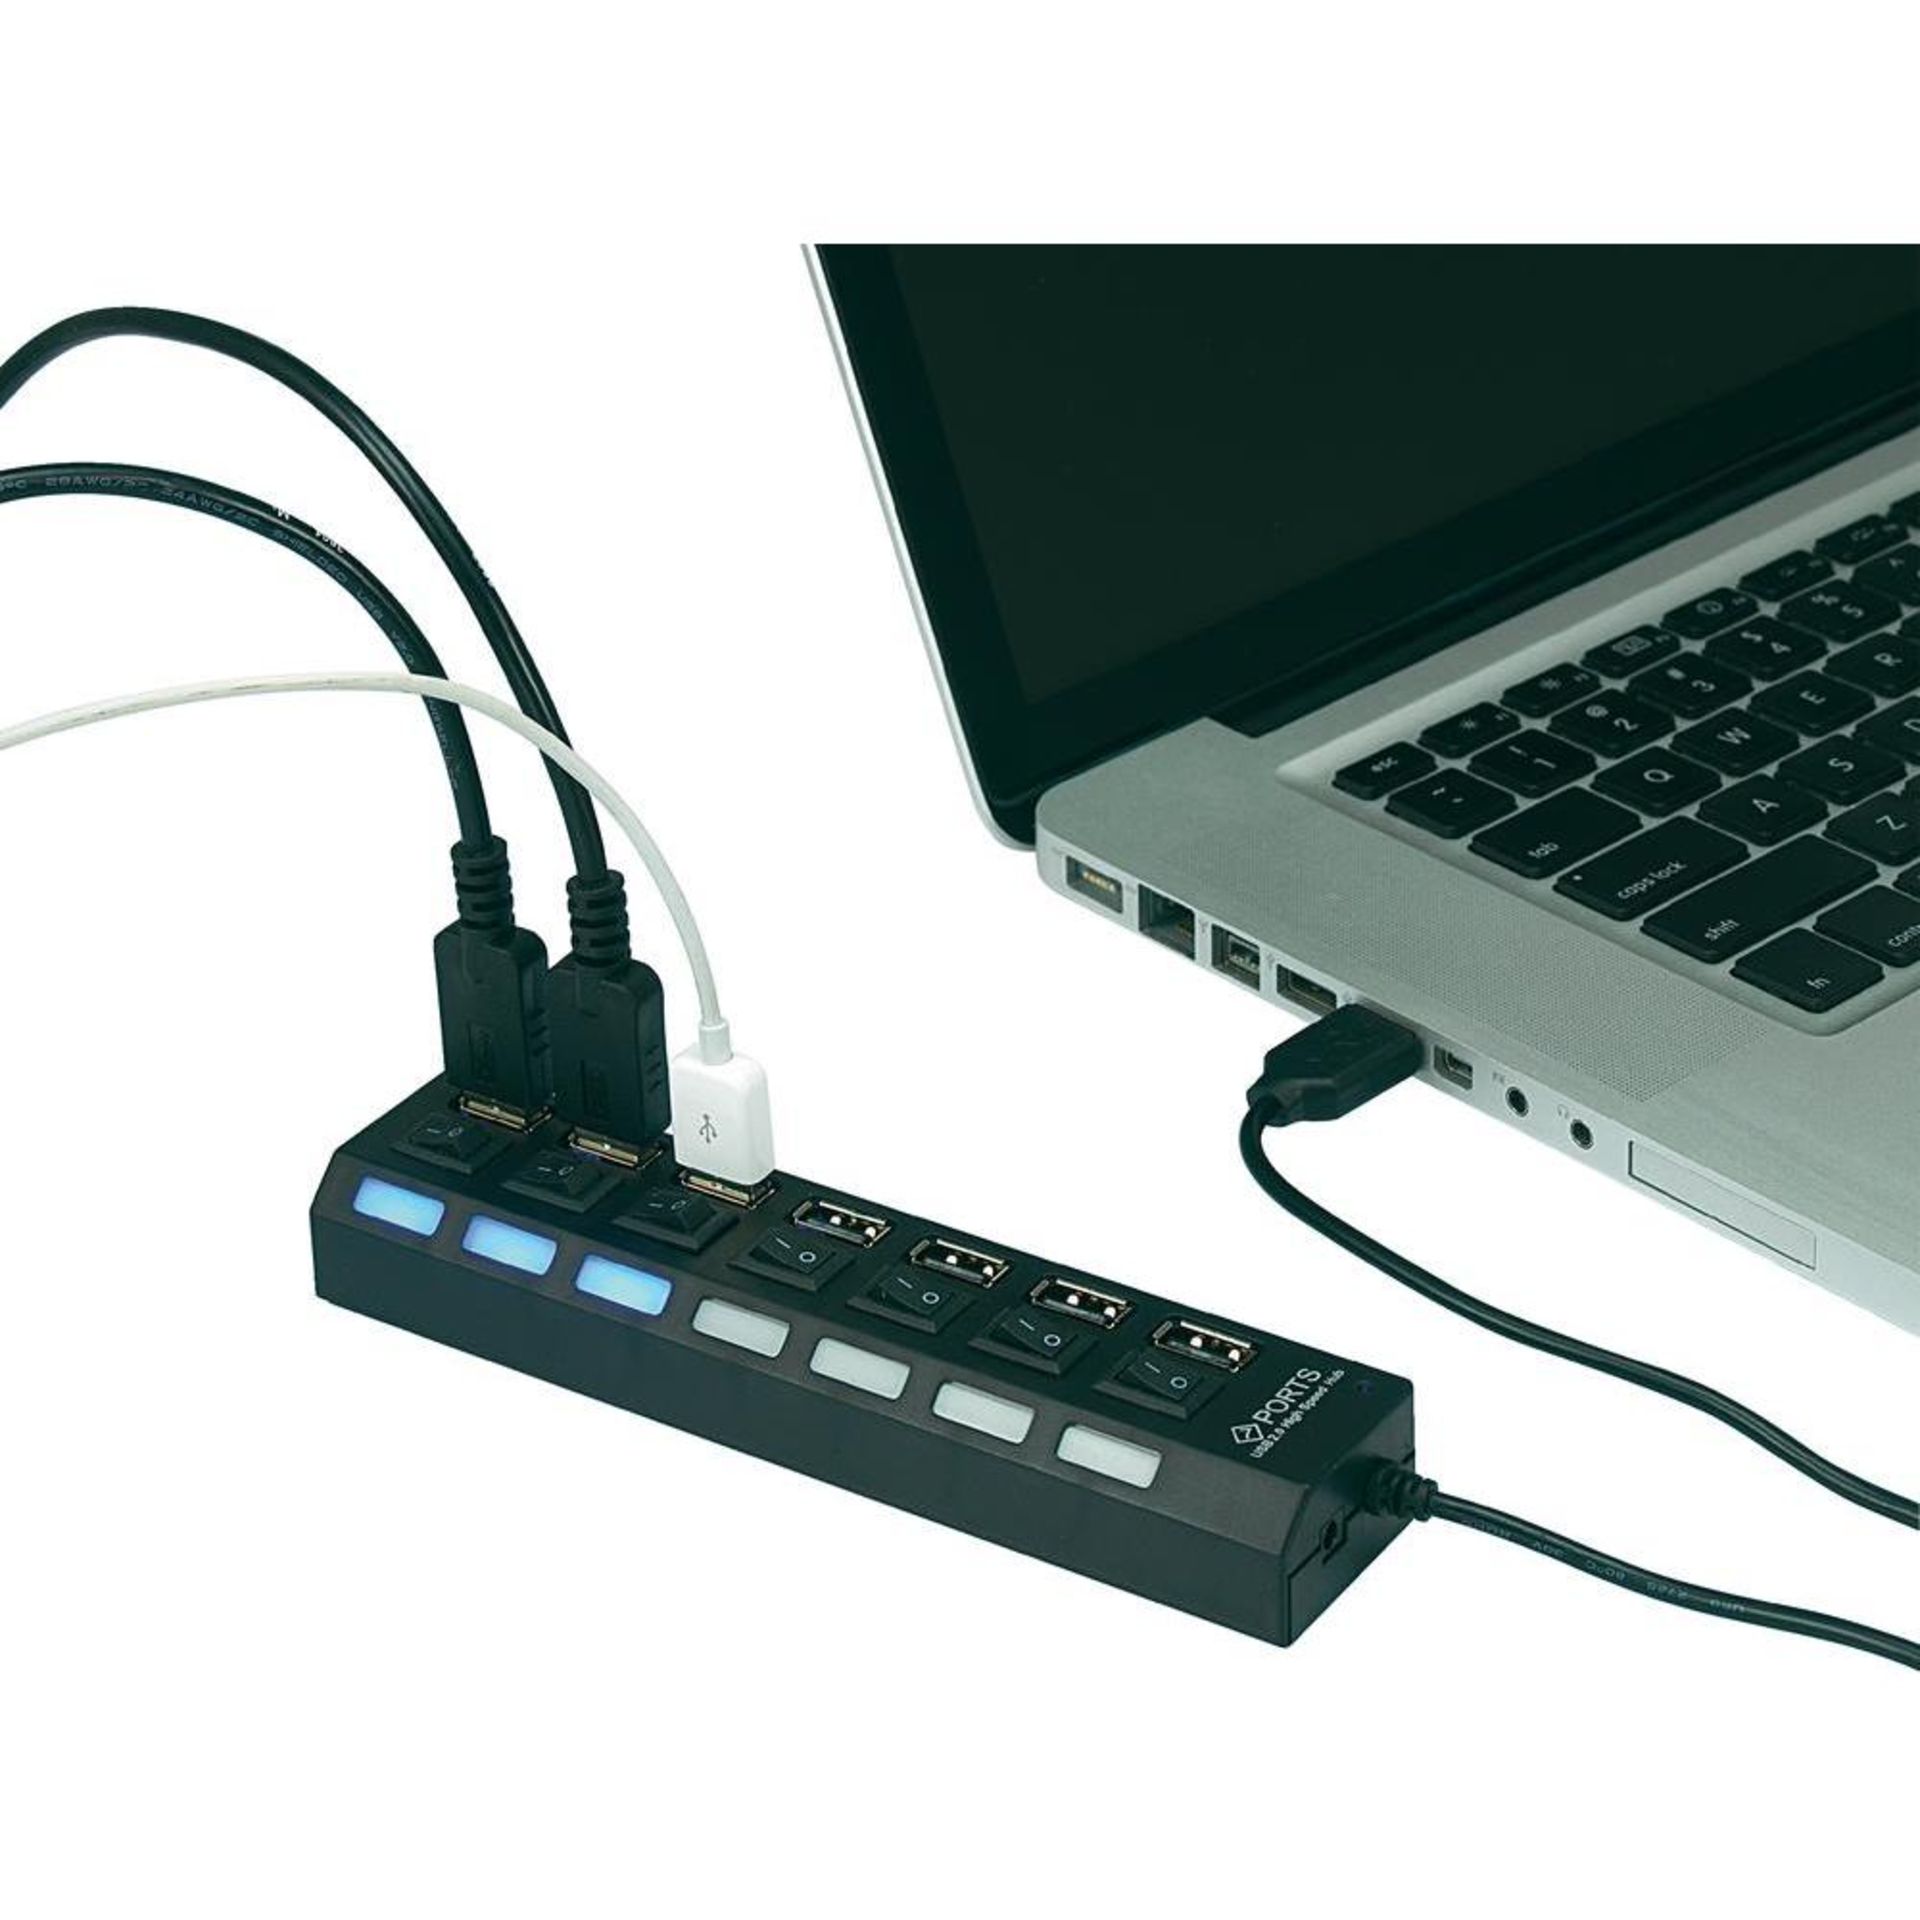 Brand New 7 Port USB High Speed Hub - On/Off Switch on Each Port - With Blue LED Indicators - - Image 2 of 2